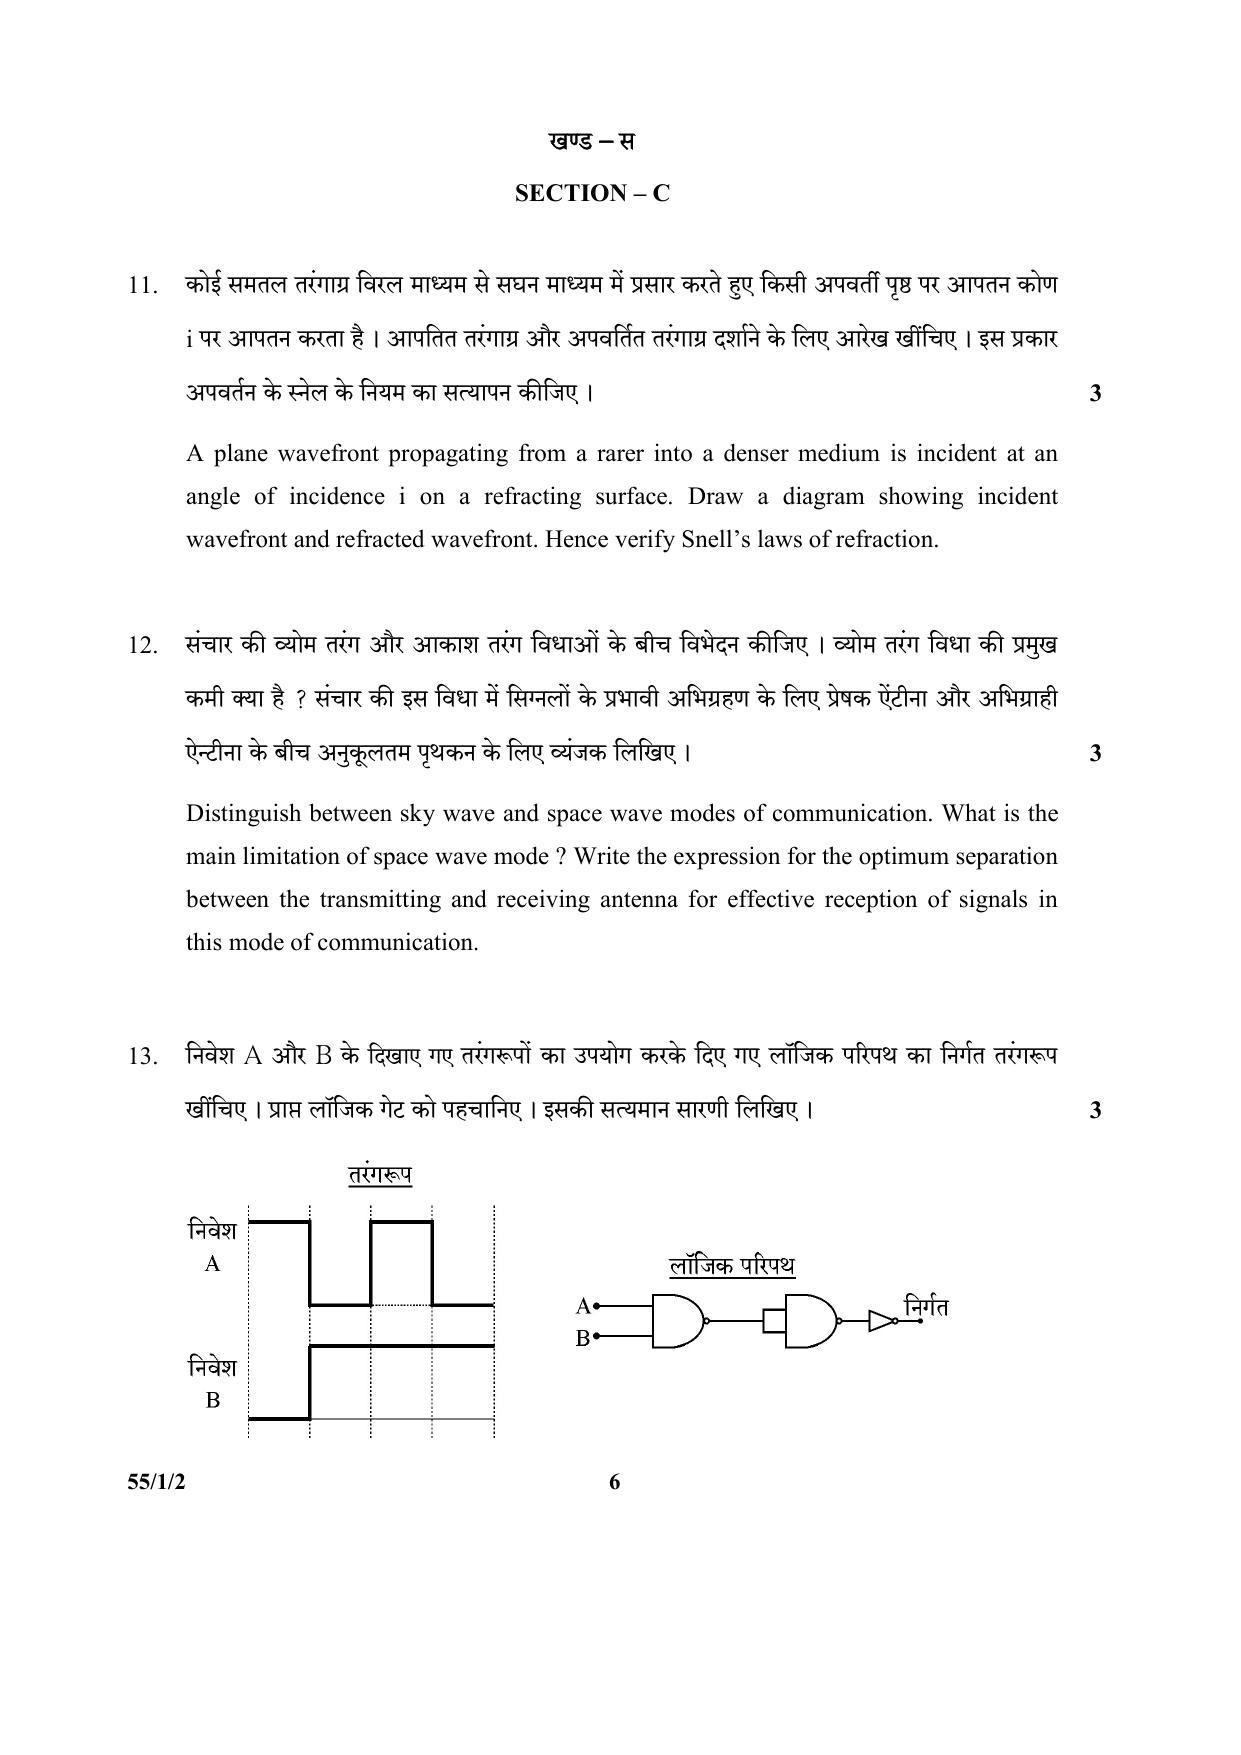 CBSE Class 12 55-1-2 (Physics) 2017-comptt Question Paper - Page 6